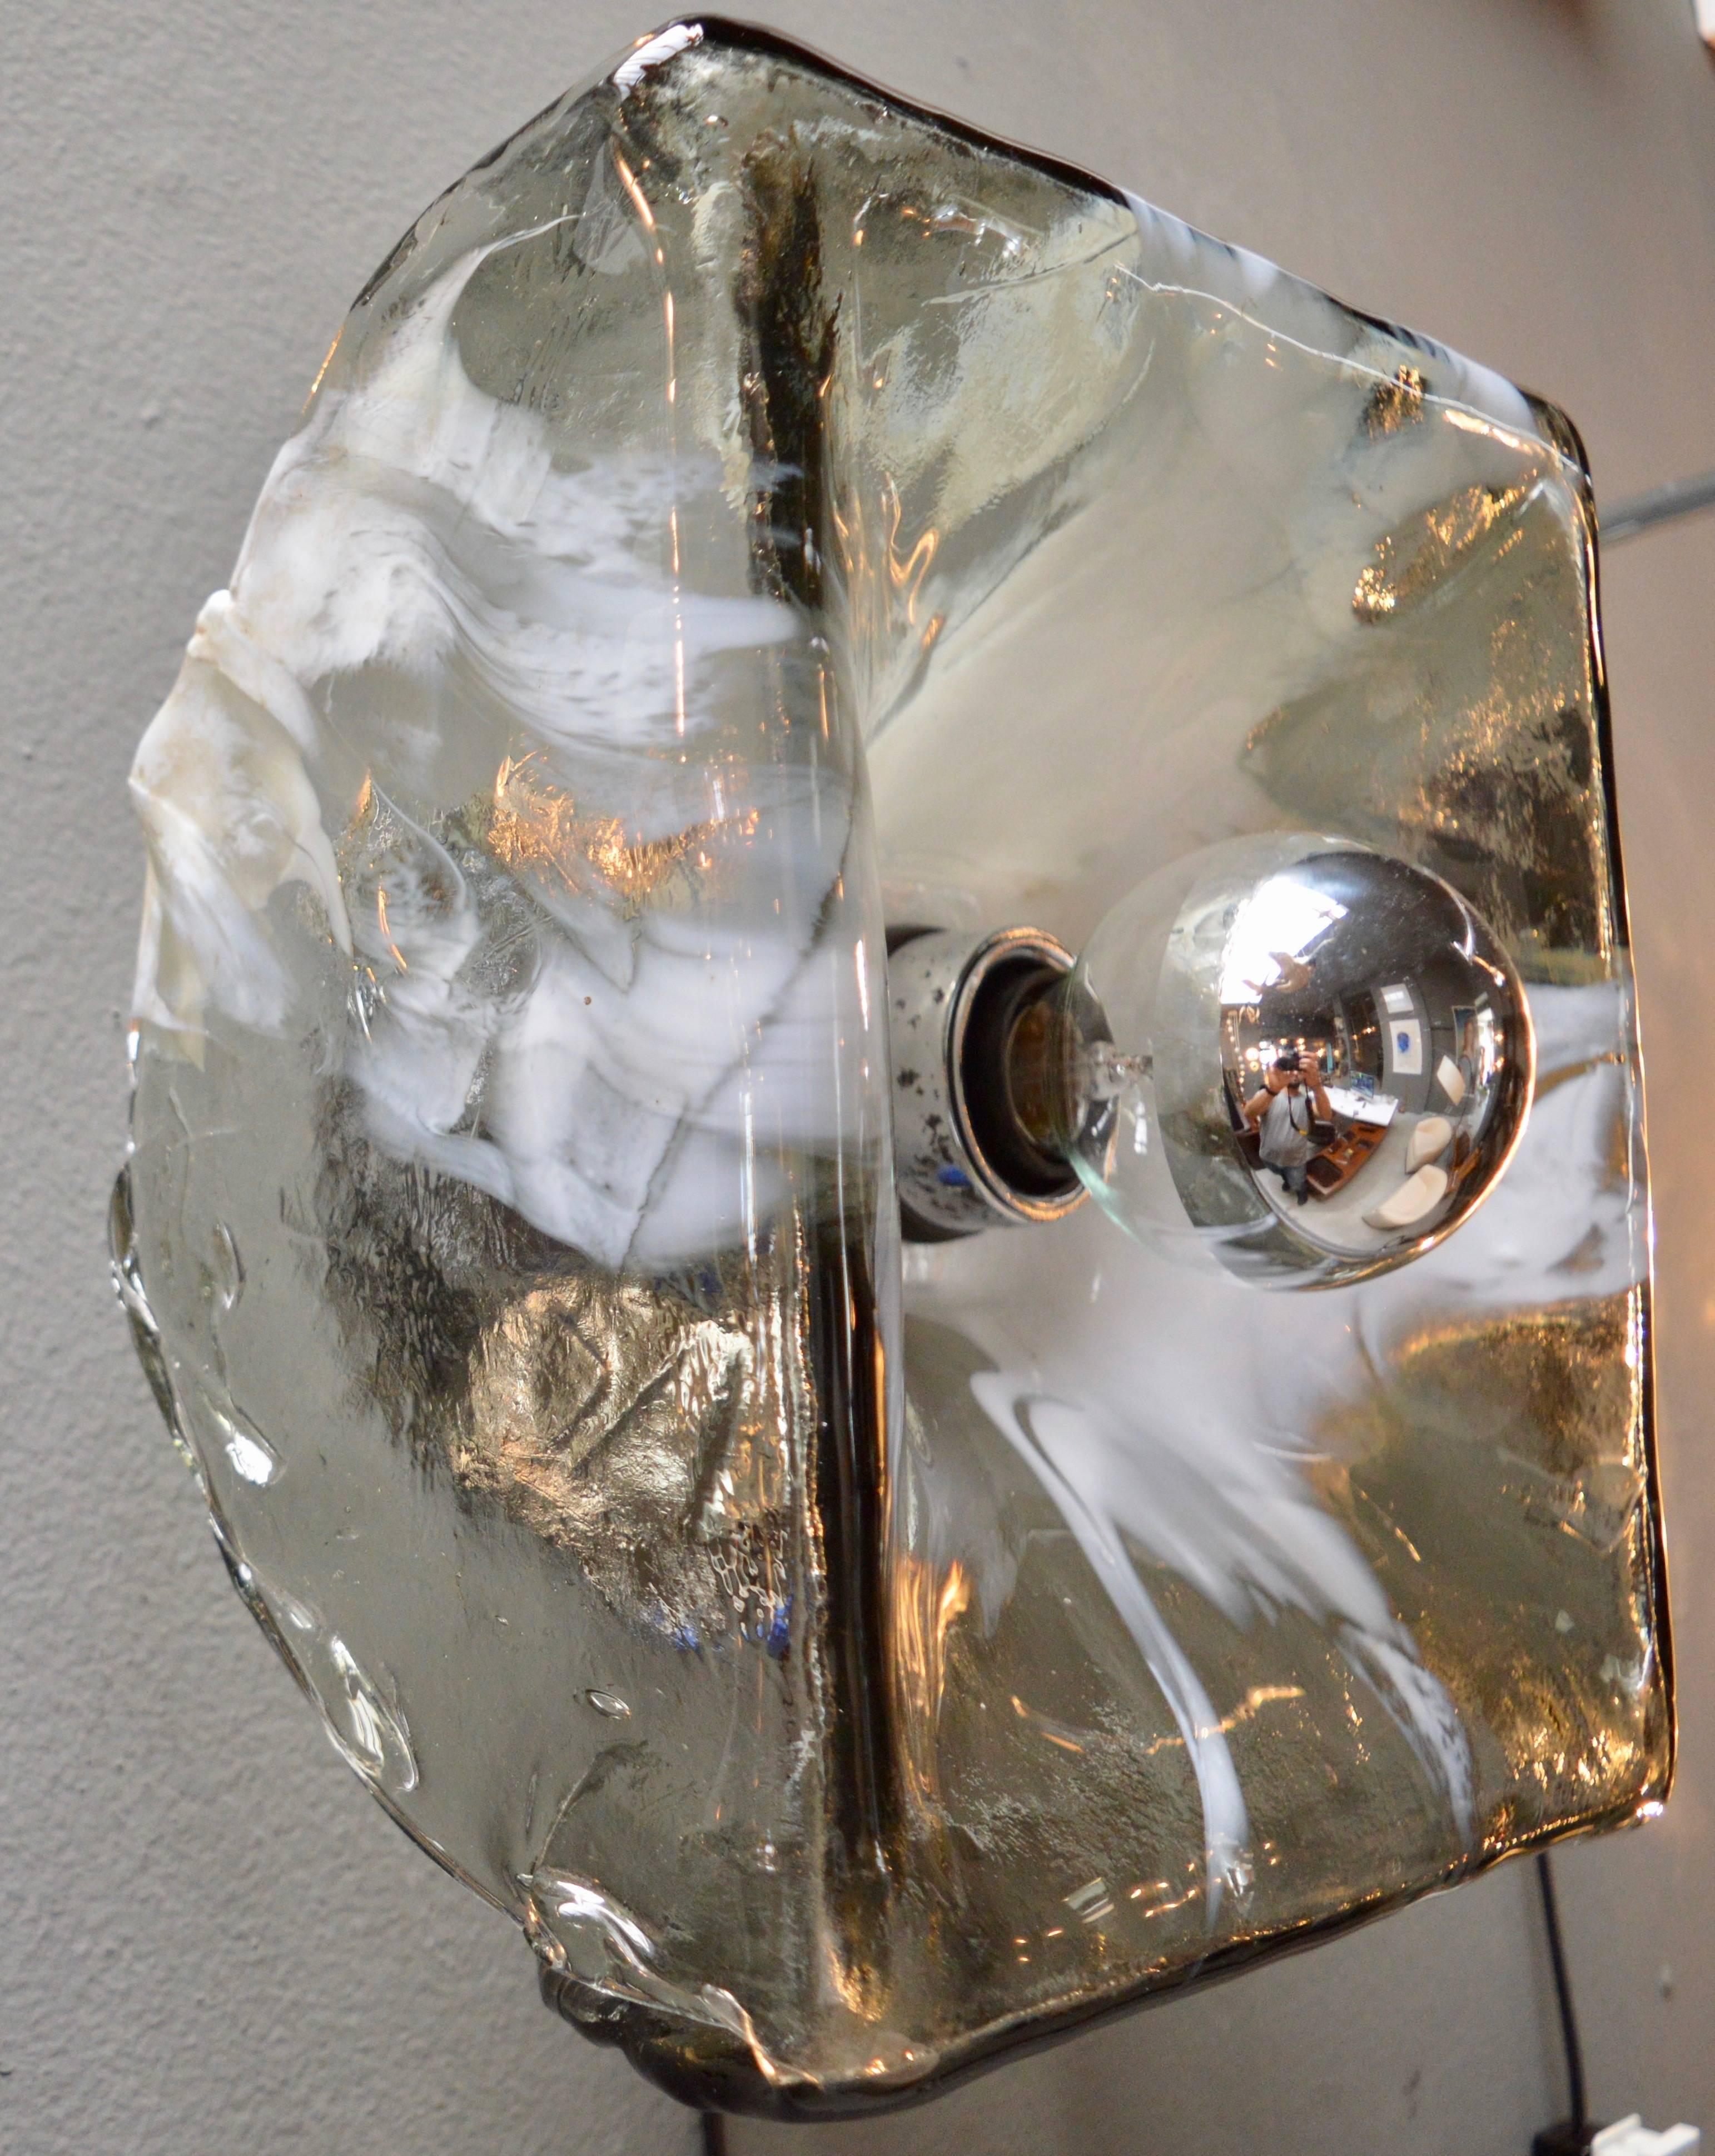 Large Murano glass flush mount or wall sconce. Grey glass with white swirl pattern. Gorgeous design. Newly rewired. Matching pair of smaller sconces available in separate listing.